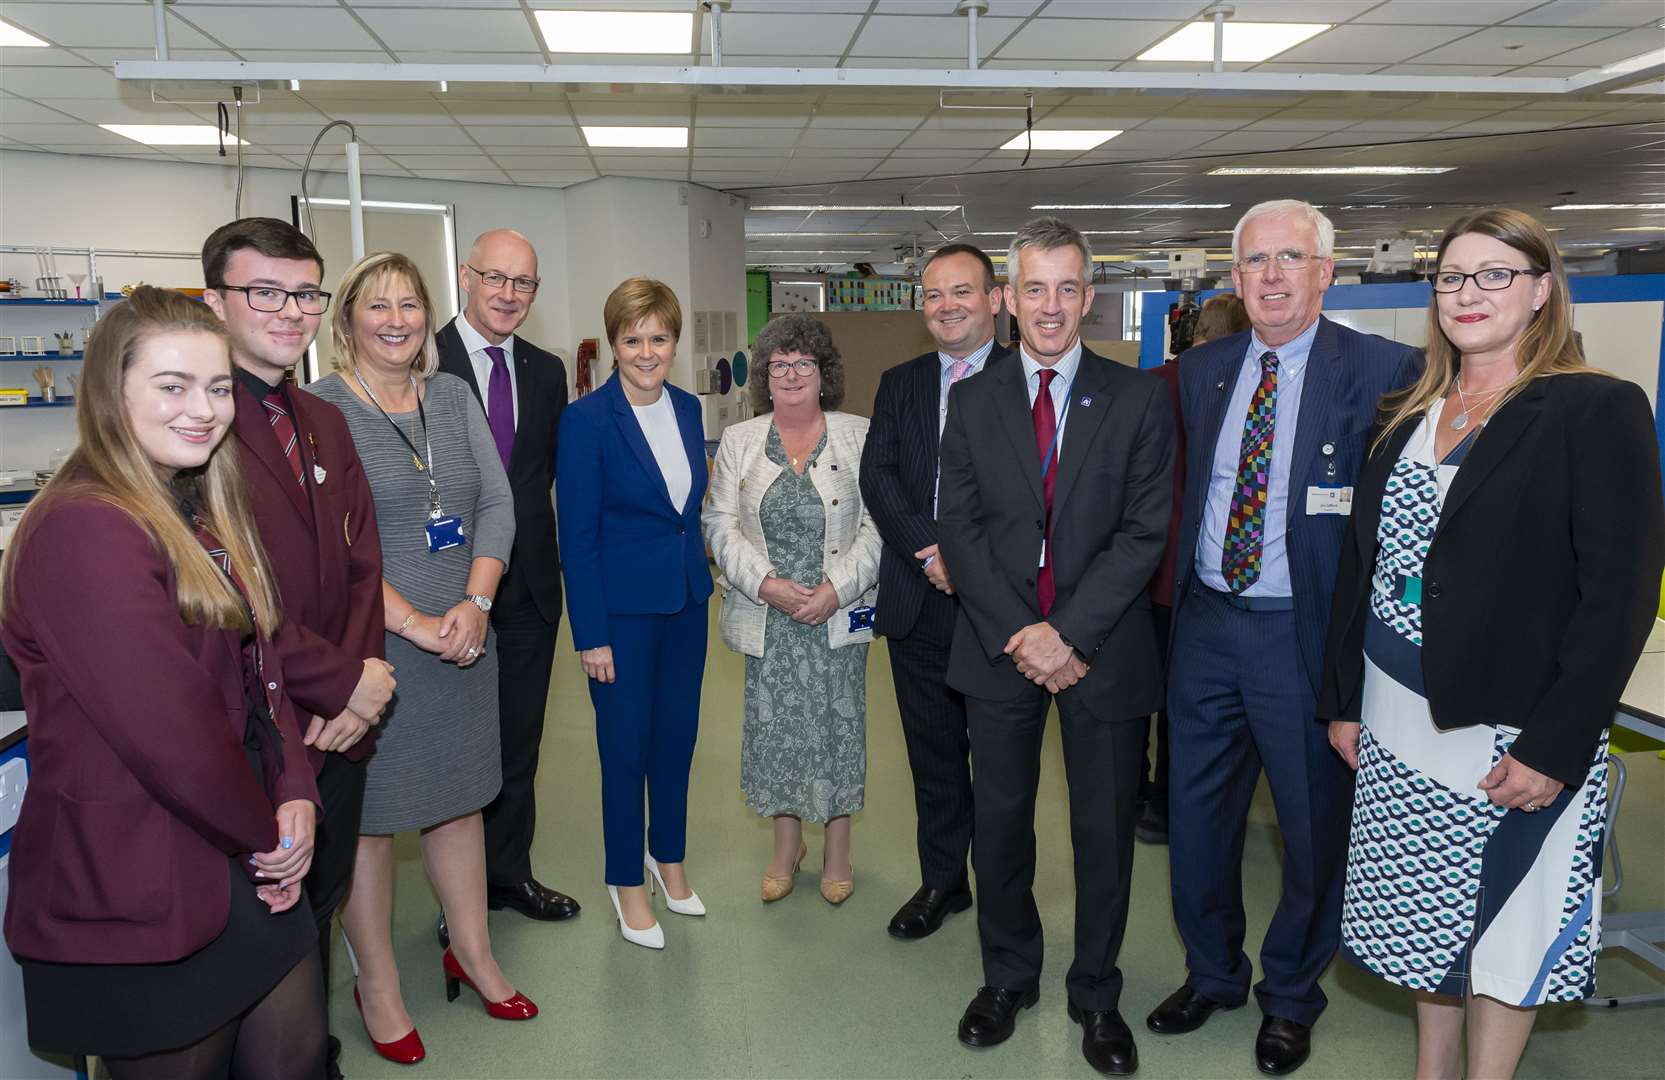 John Swinney and Nicola Sturgeon meet Aberdeenshire officials including the chairwoman of the education committee, Gillian Owen, director of education Lawrence Findlay and chief executive Jim Savage, who welcomed the additional funding.